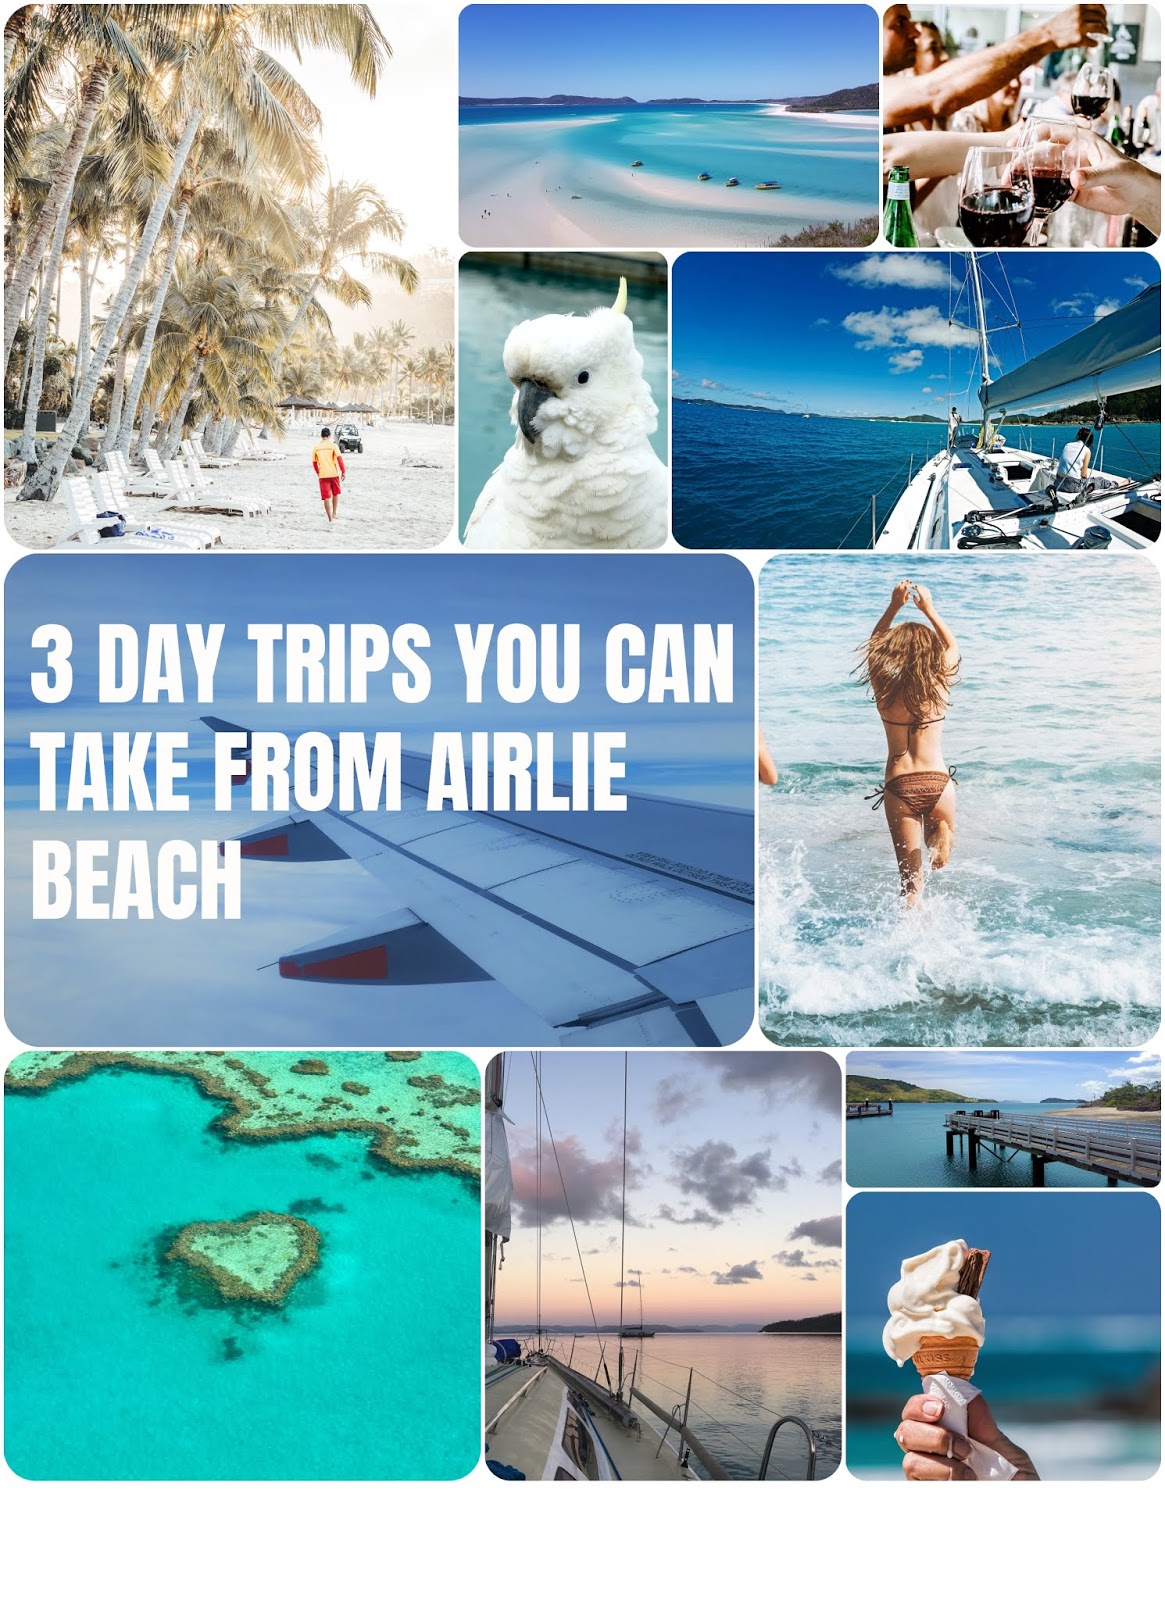 3 Day Trips You Can Take From Airlie Beach